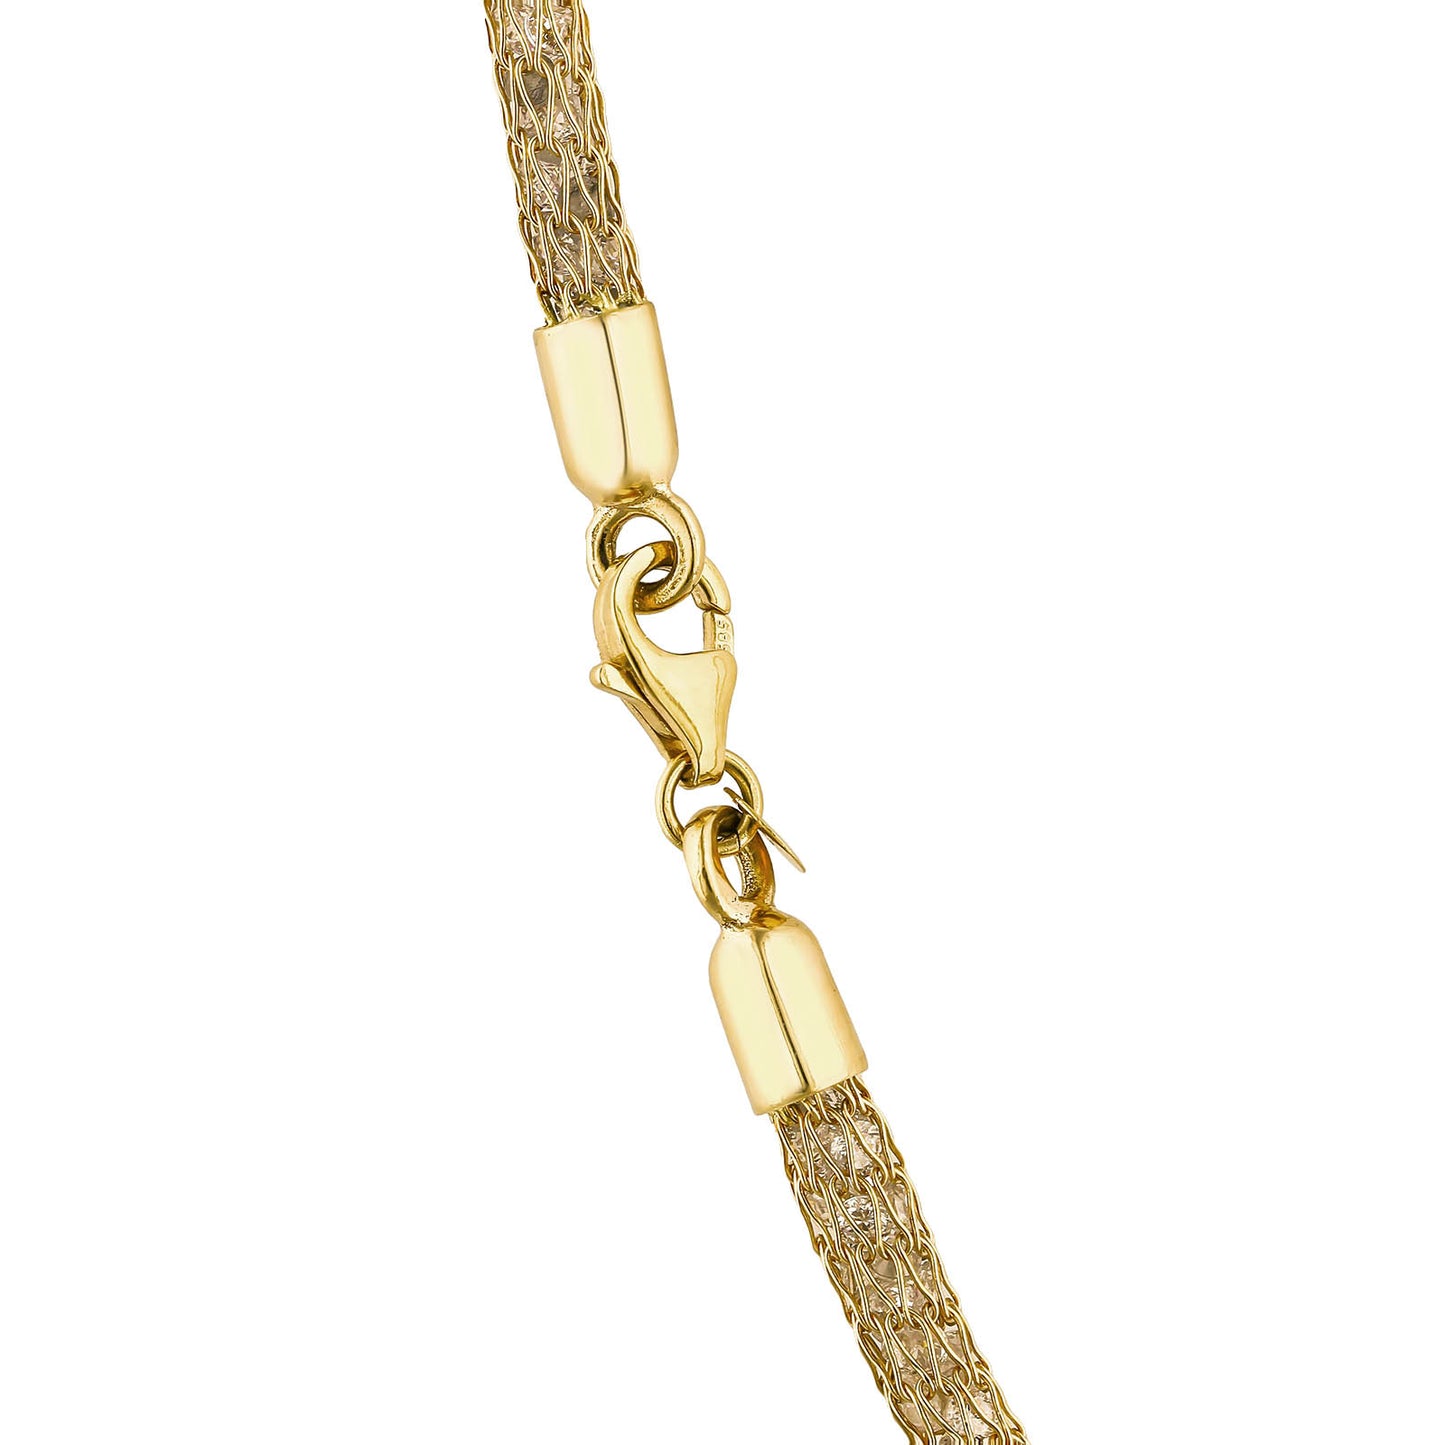 762888 - 14K Yellow Gold - Mesh Necklace